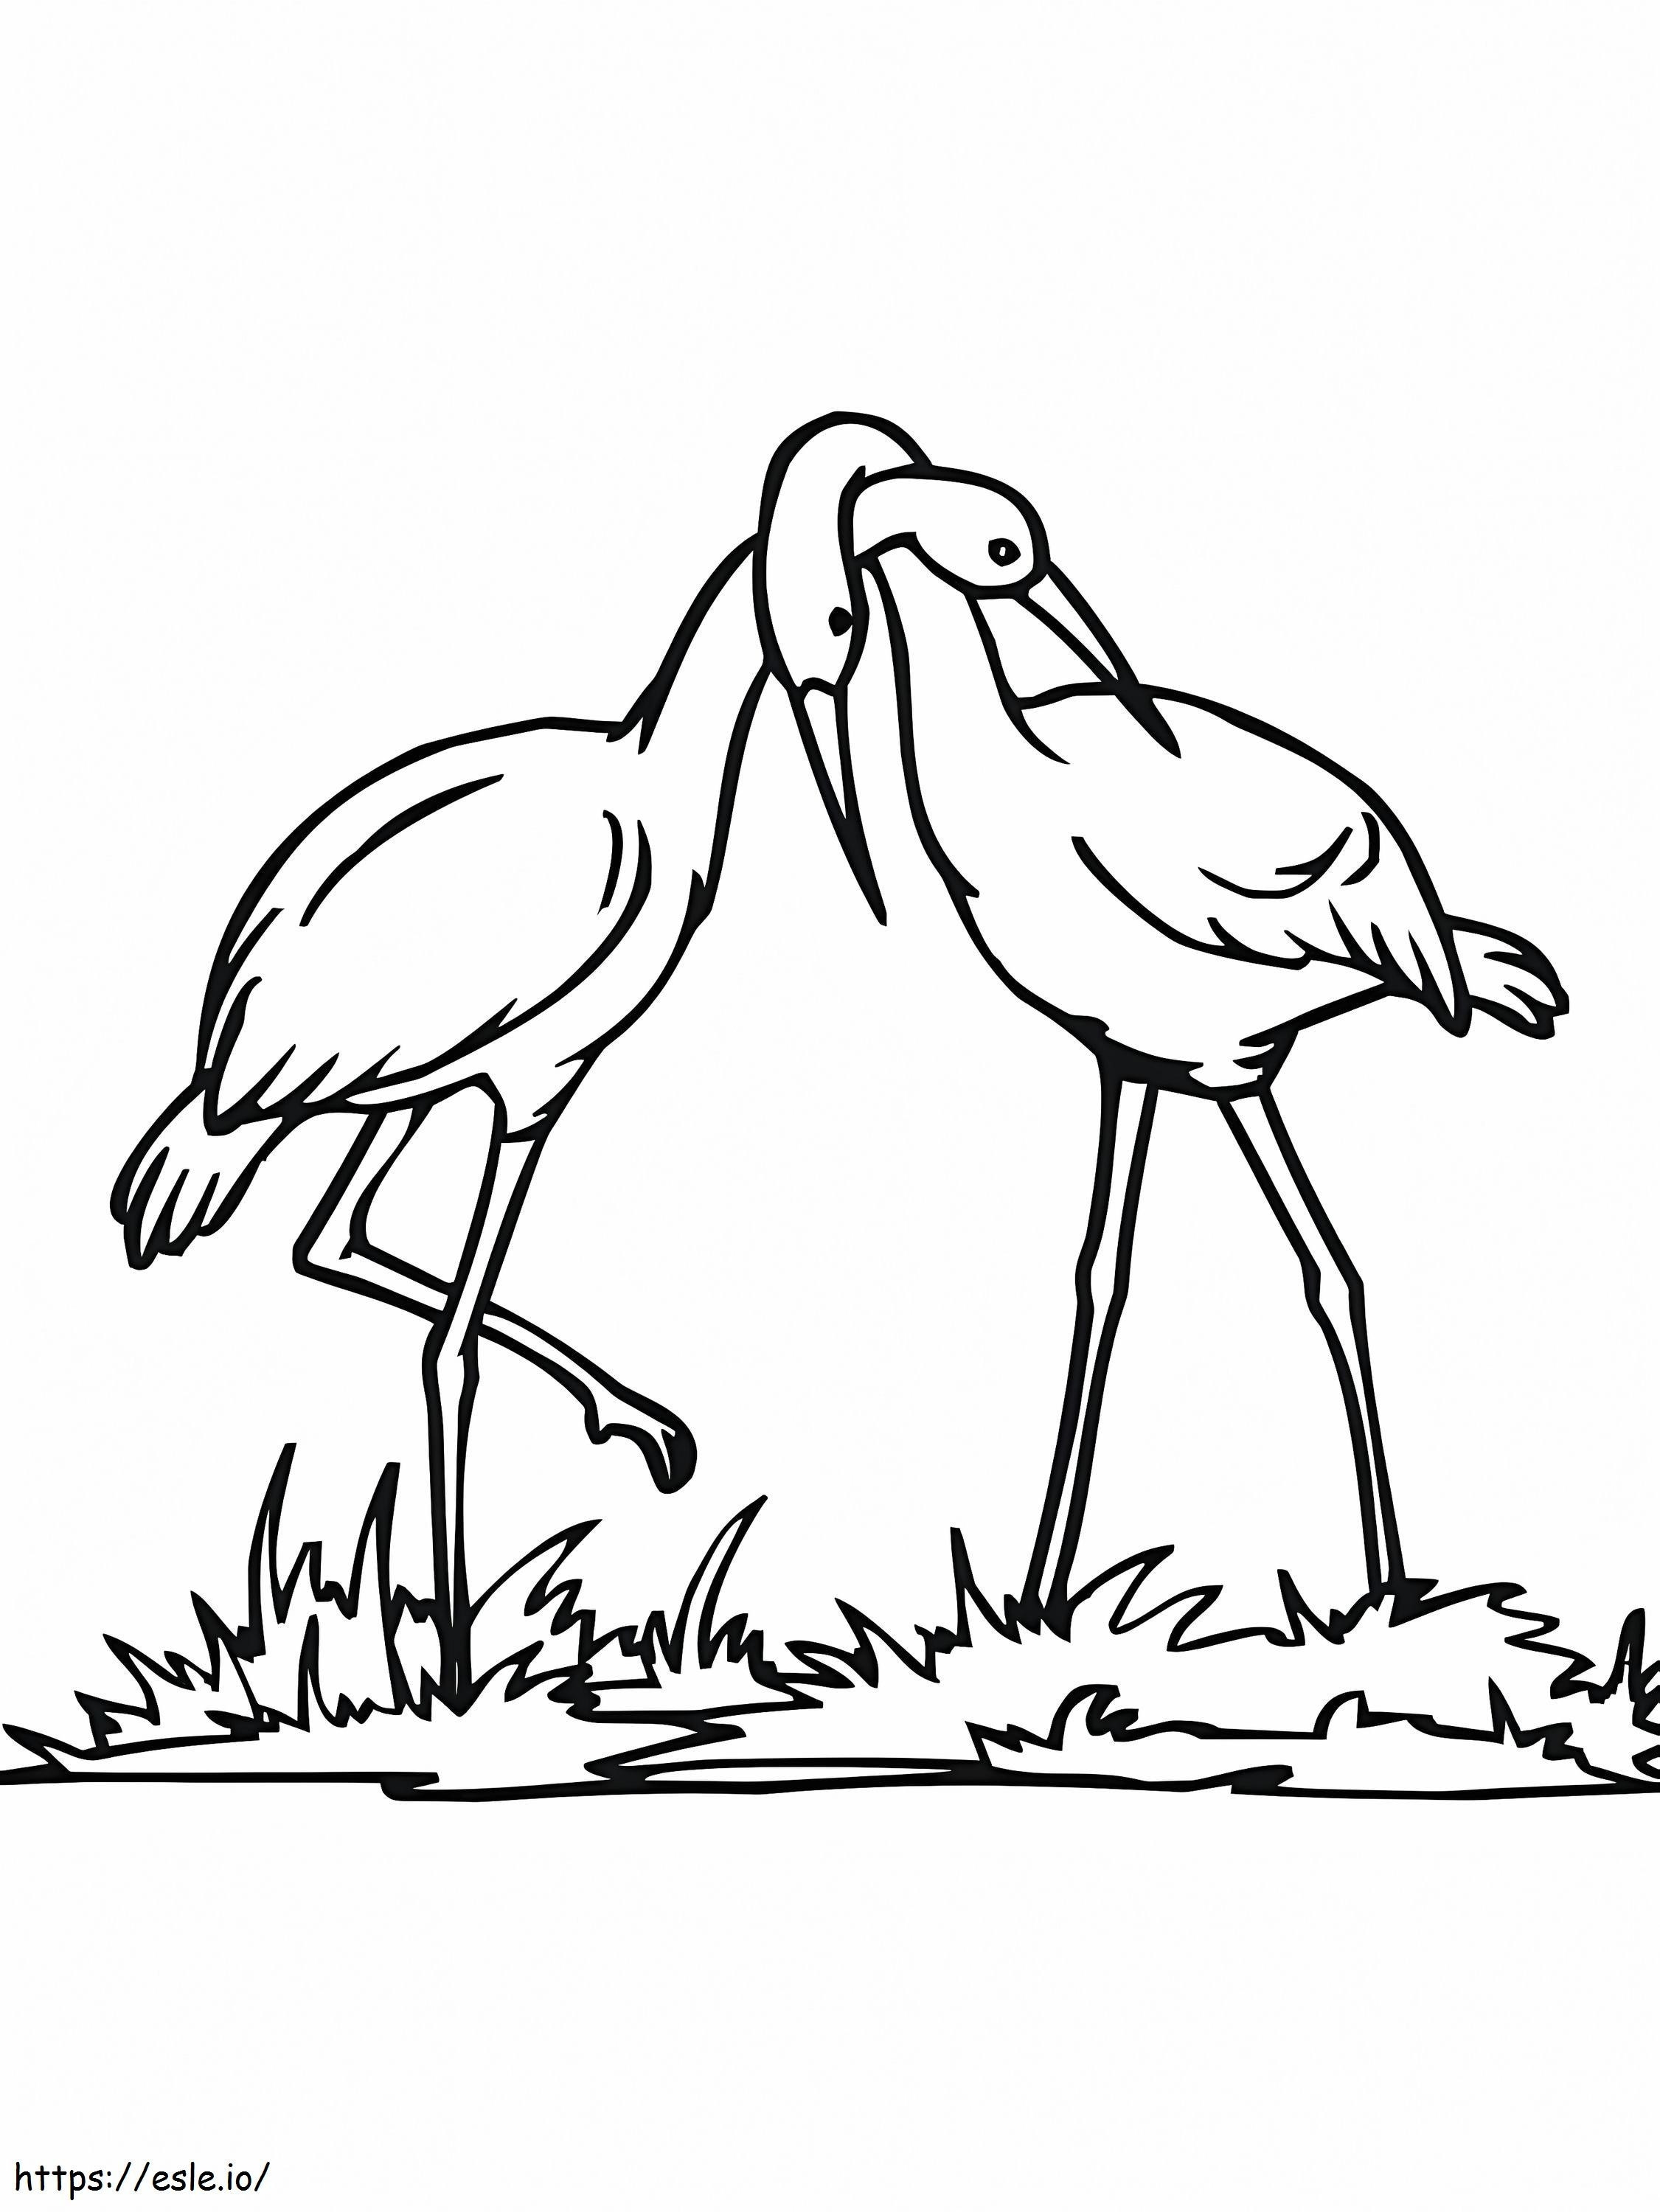 Stork Couple coloring page